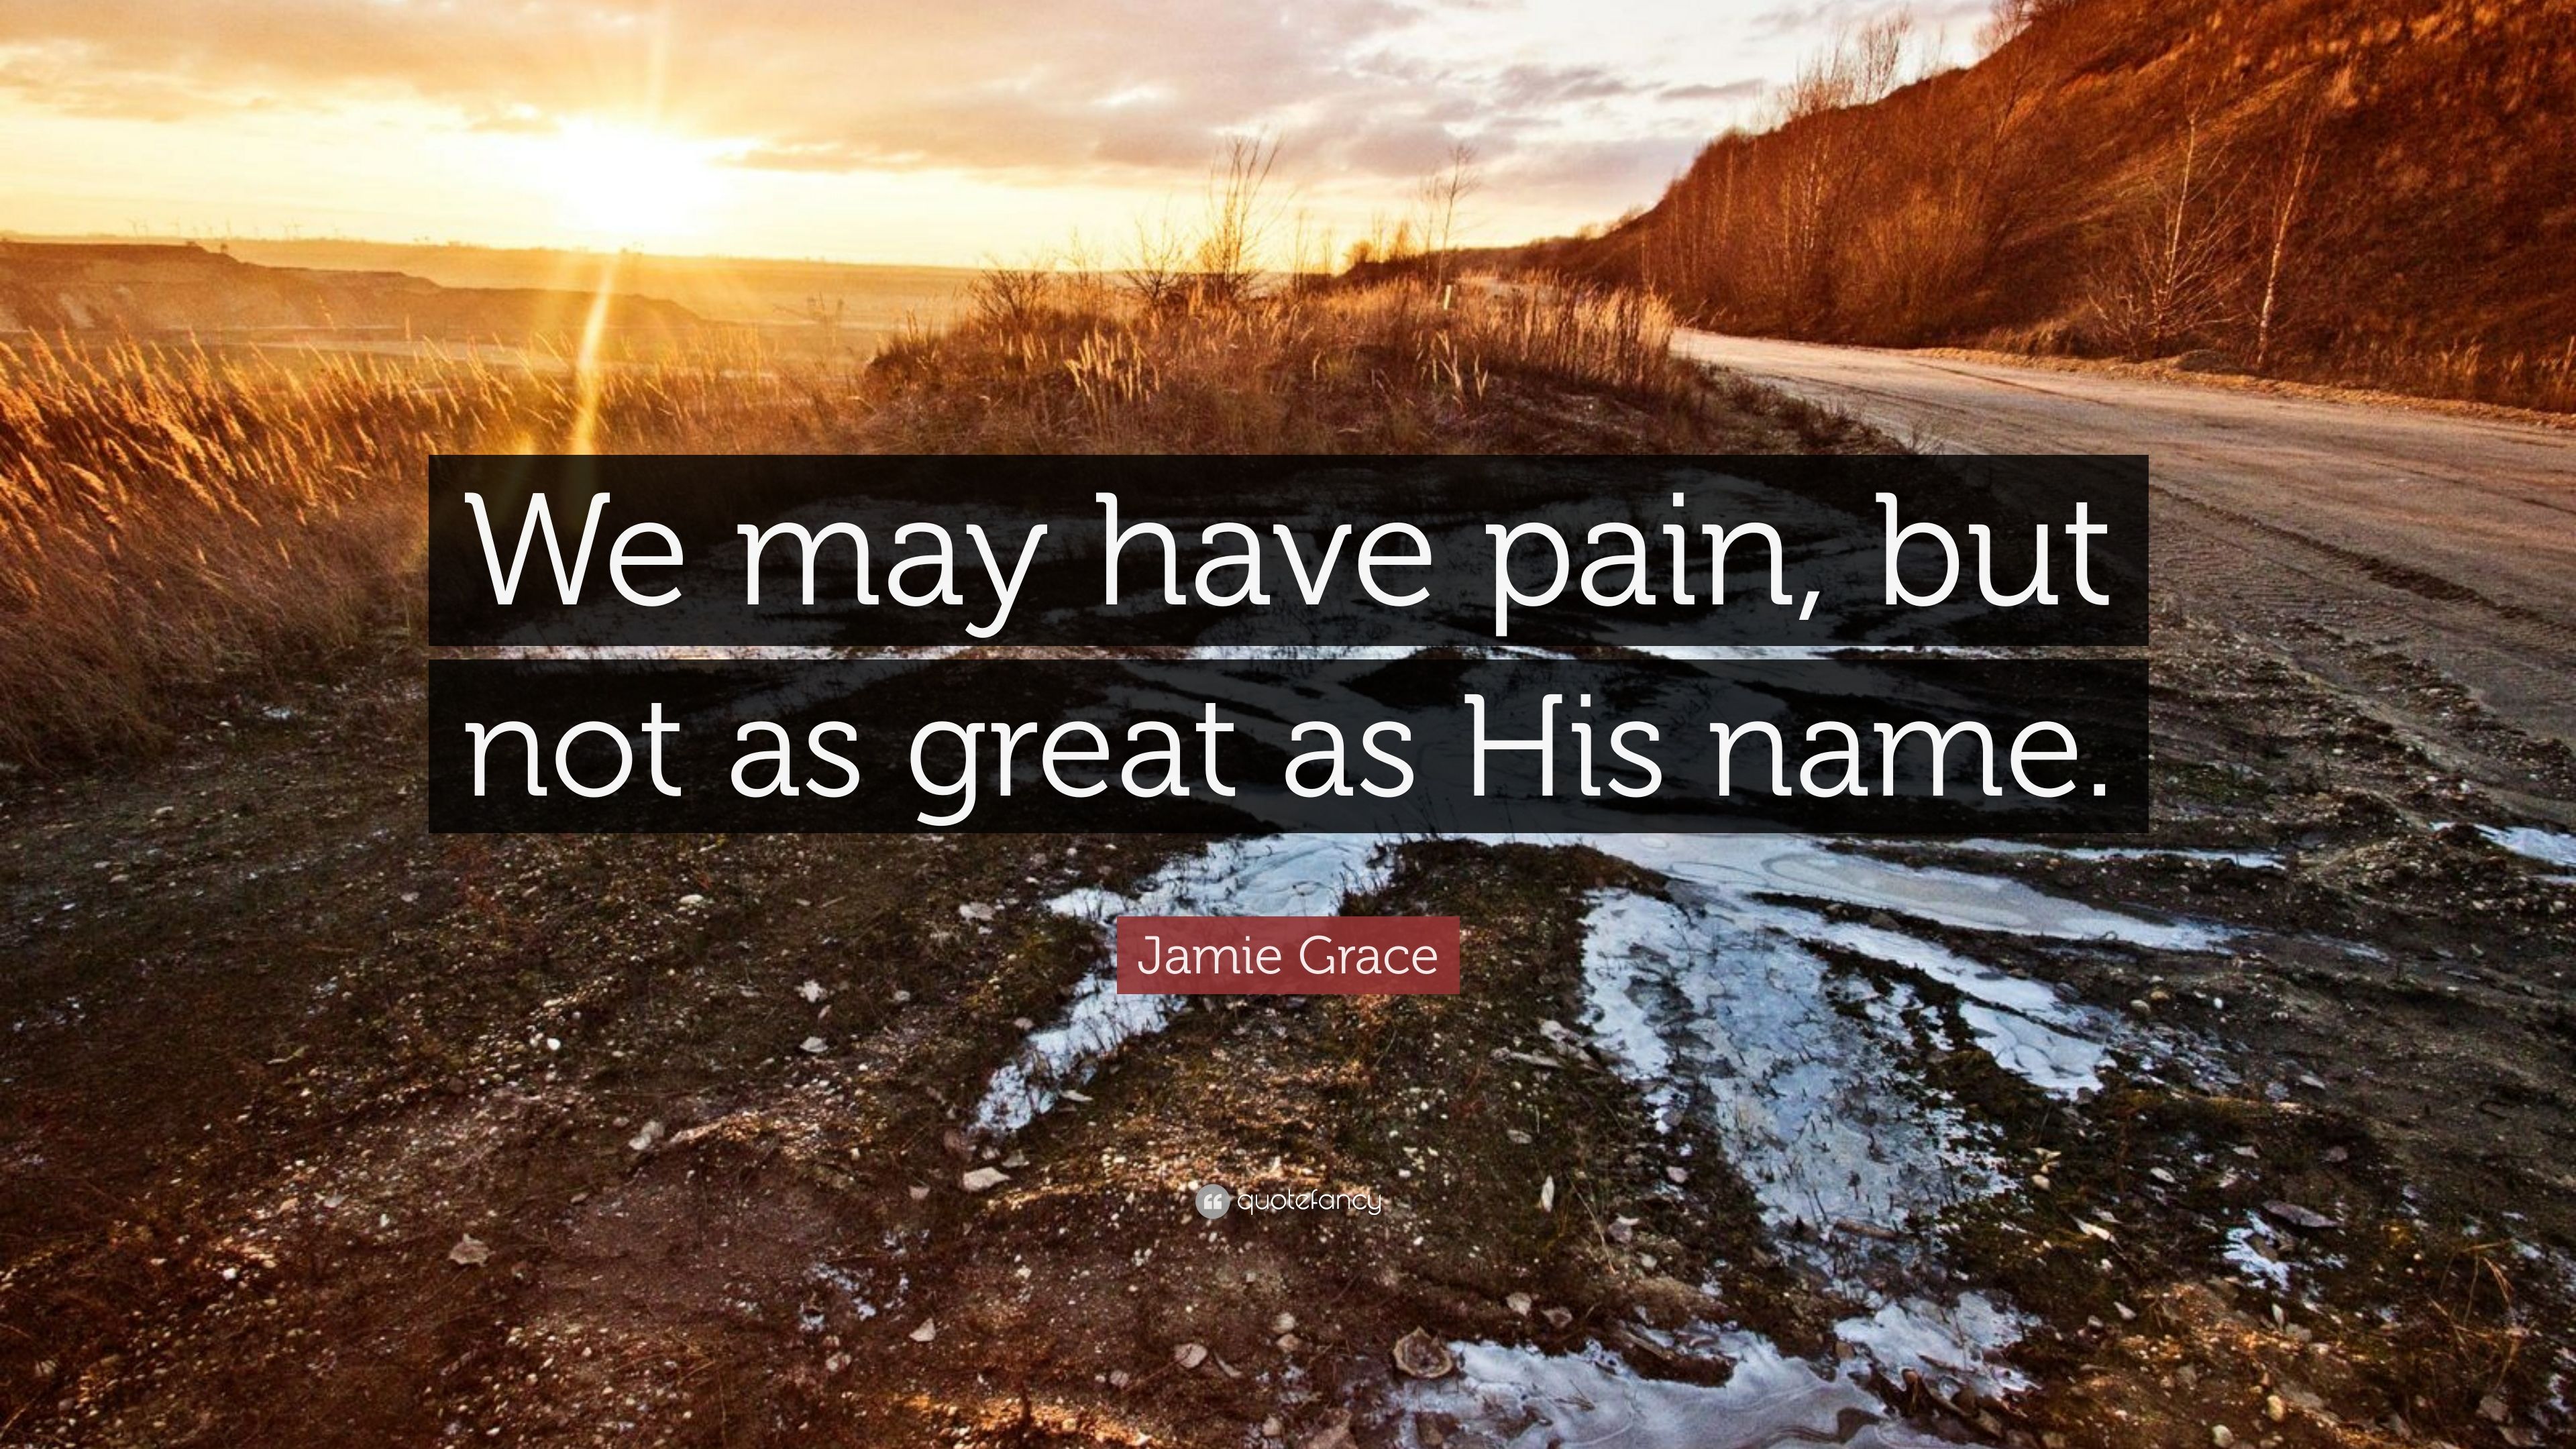 Jamie Grace Quote: “We may have pain, but not as great as His name